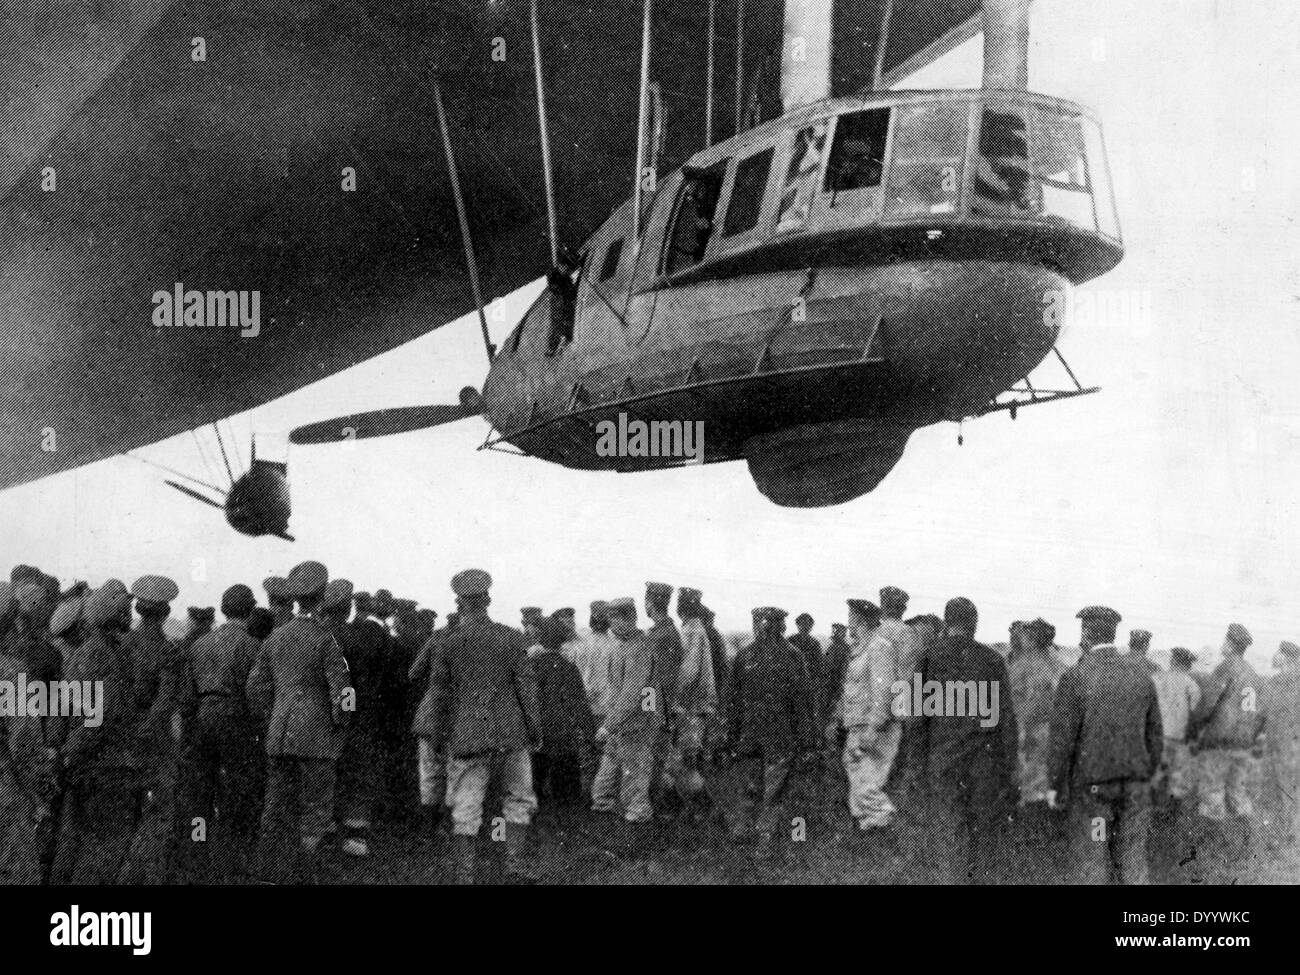 Zeppelin L 59 takes off, 1917 Stock Photo